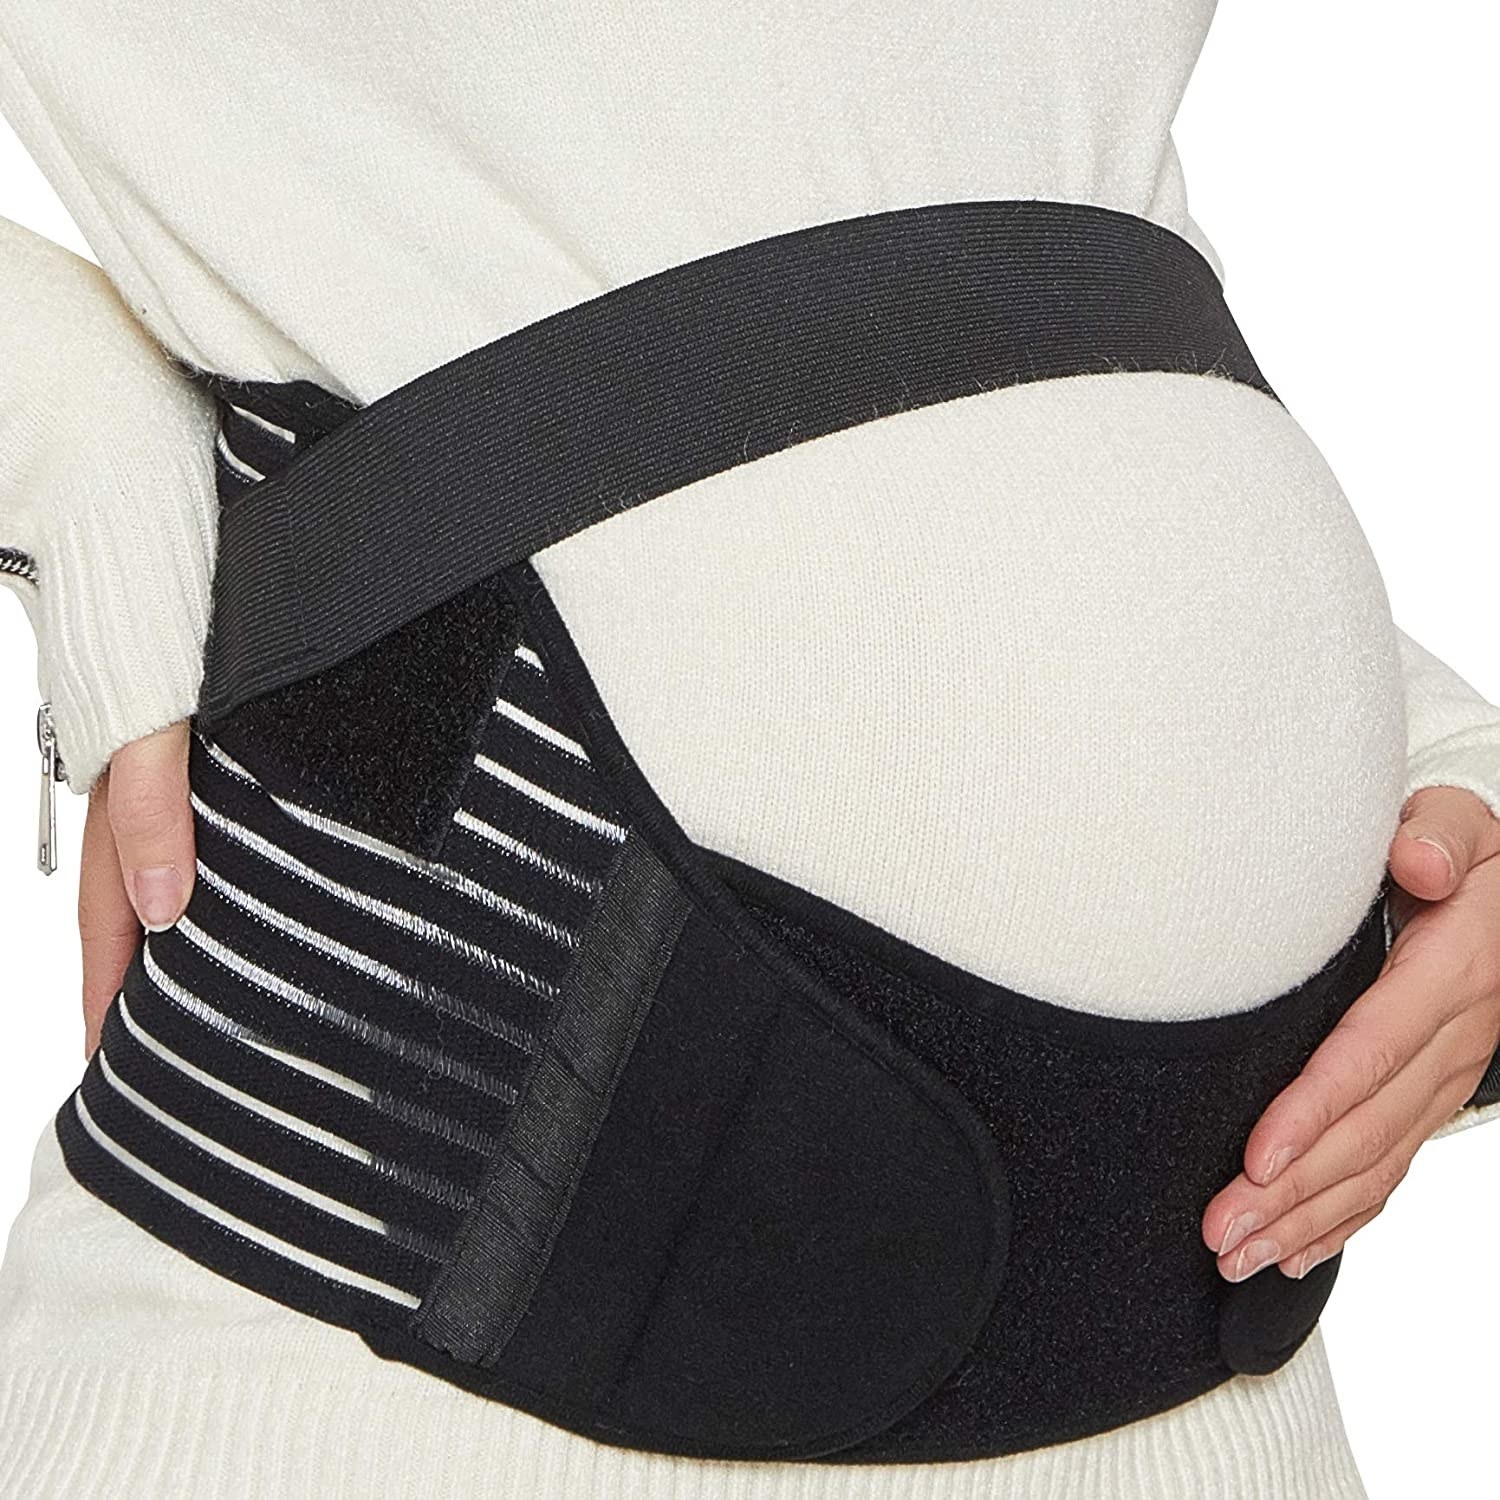 A person wearing the pregnancy belt over a sweater